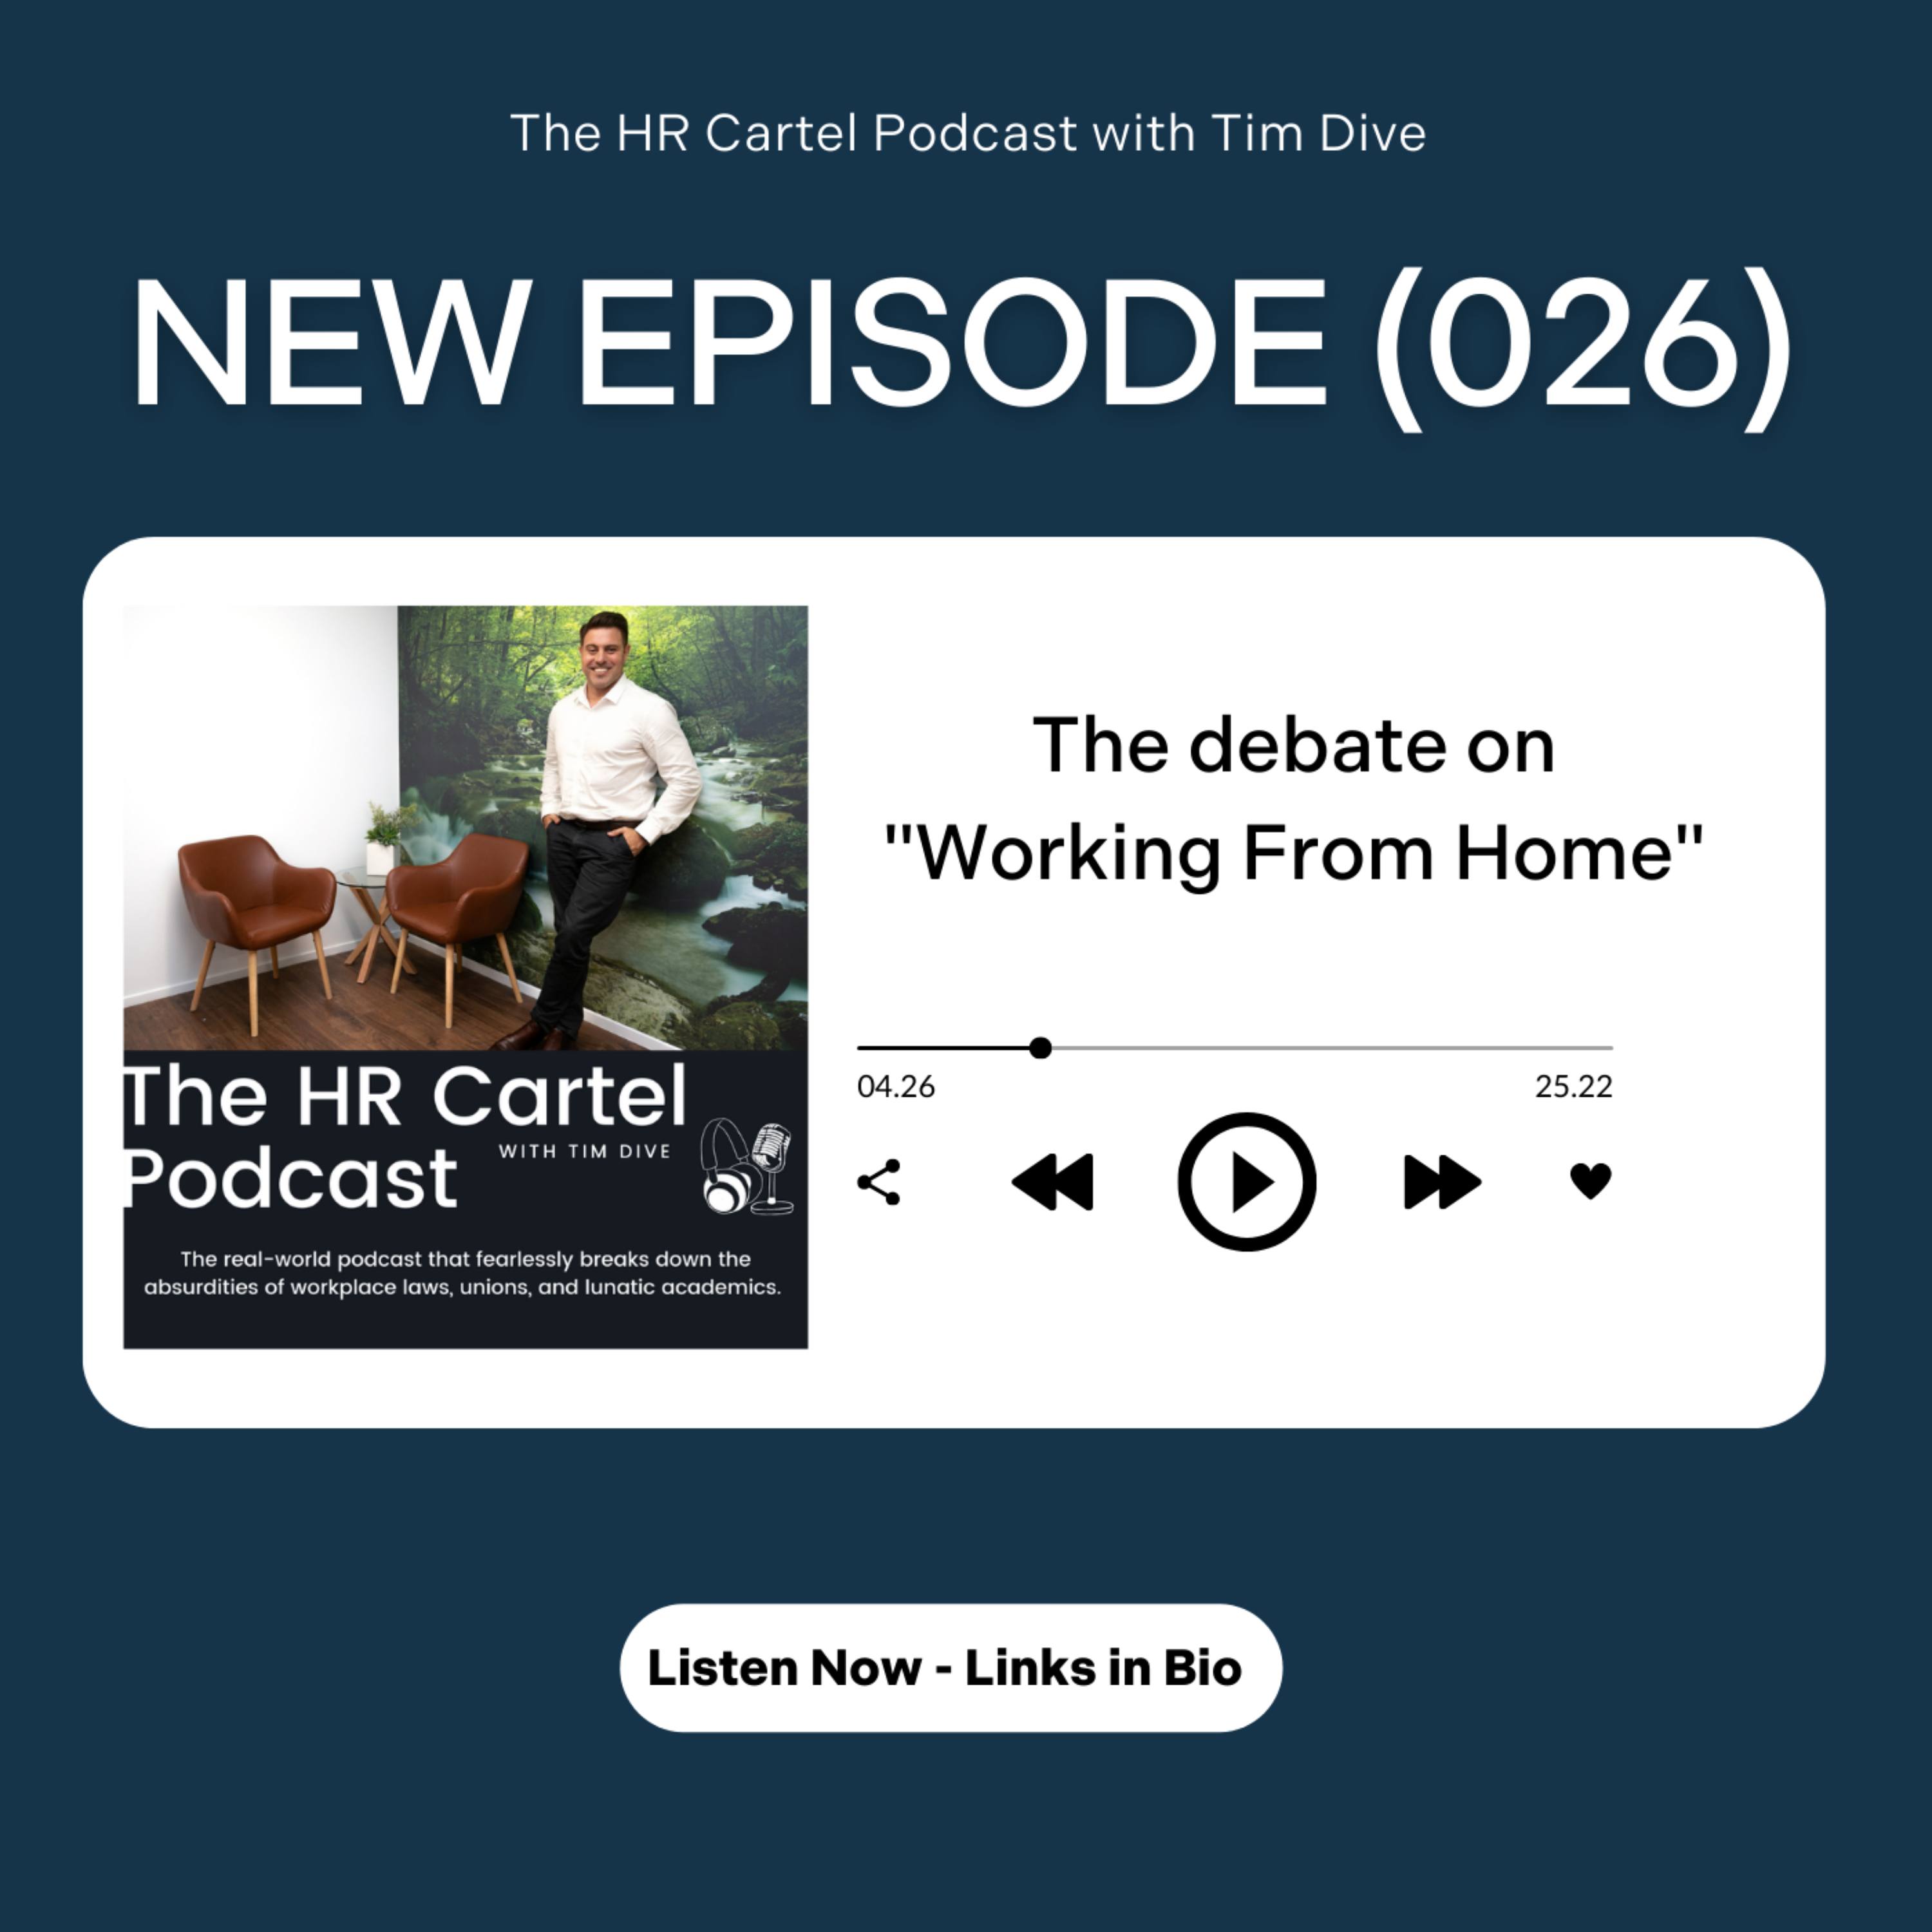 (026) The debate on ”Working From Home”